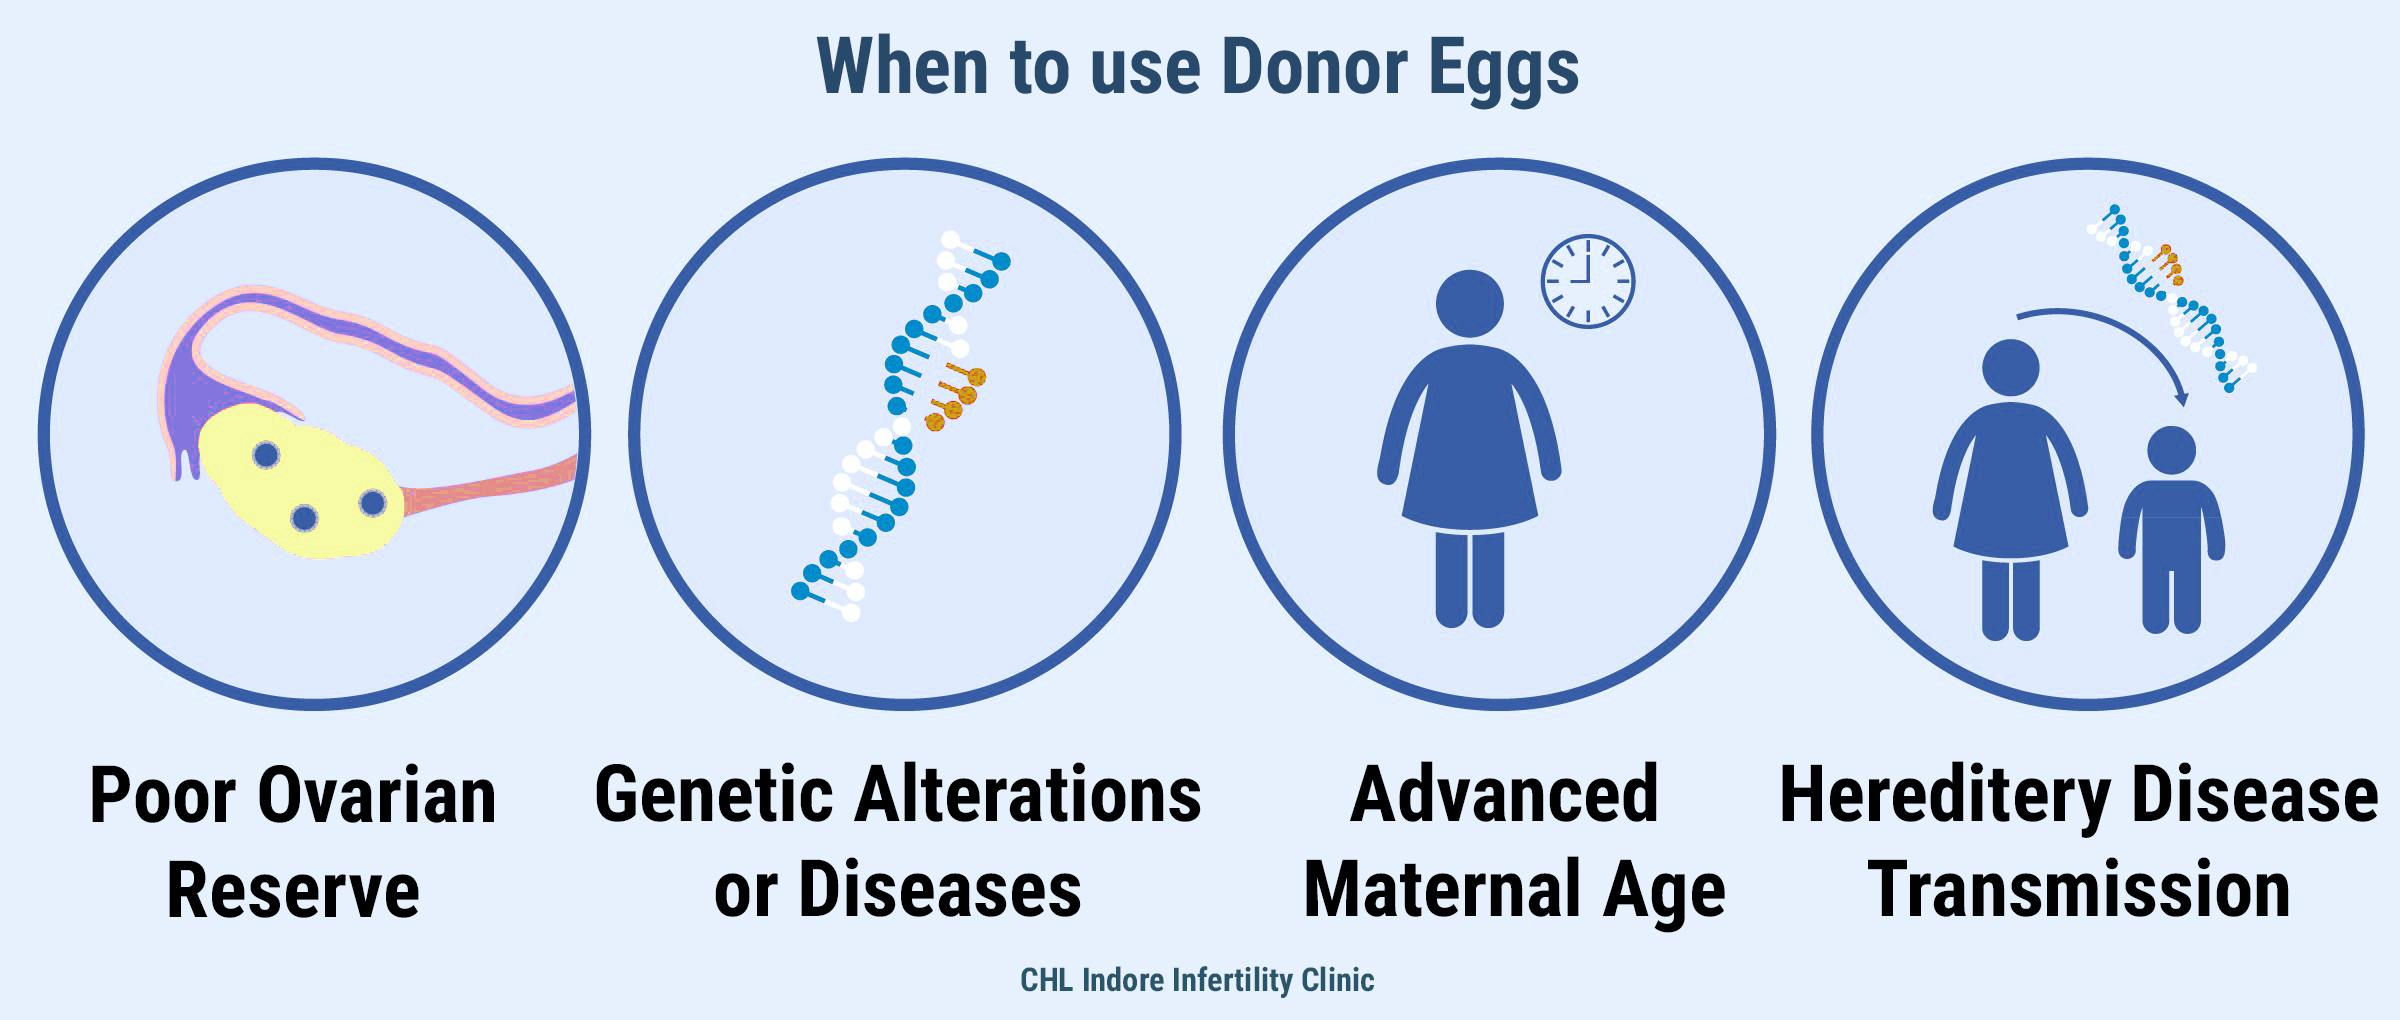 using donor eggs